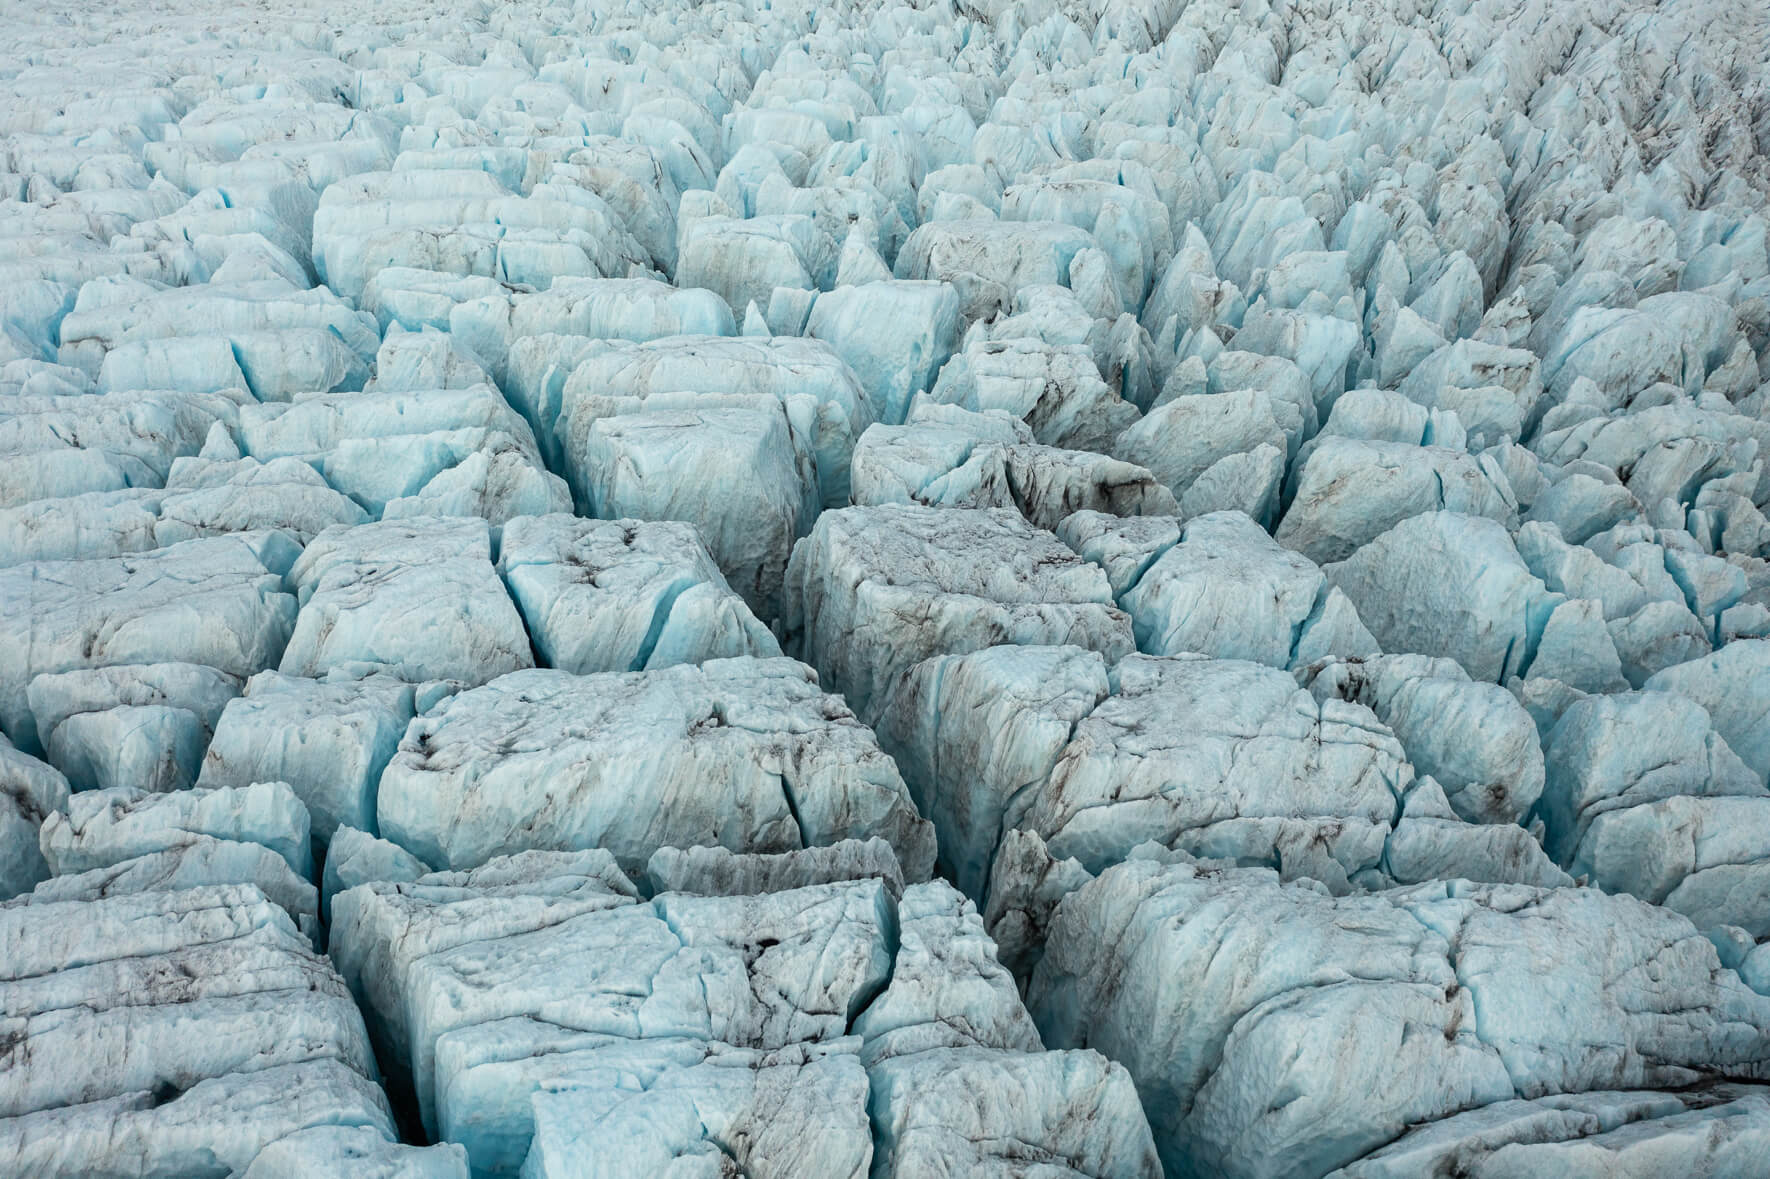 Aerial photograph of Fjallsjökull glacier in Iceland with deep and dark crevasses